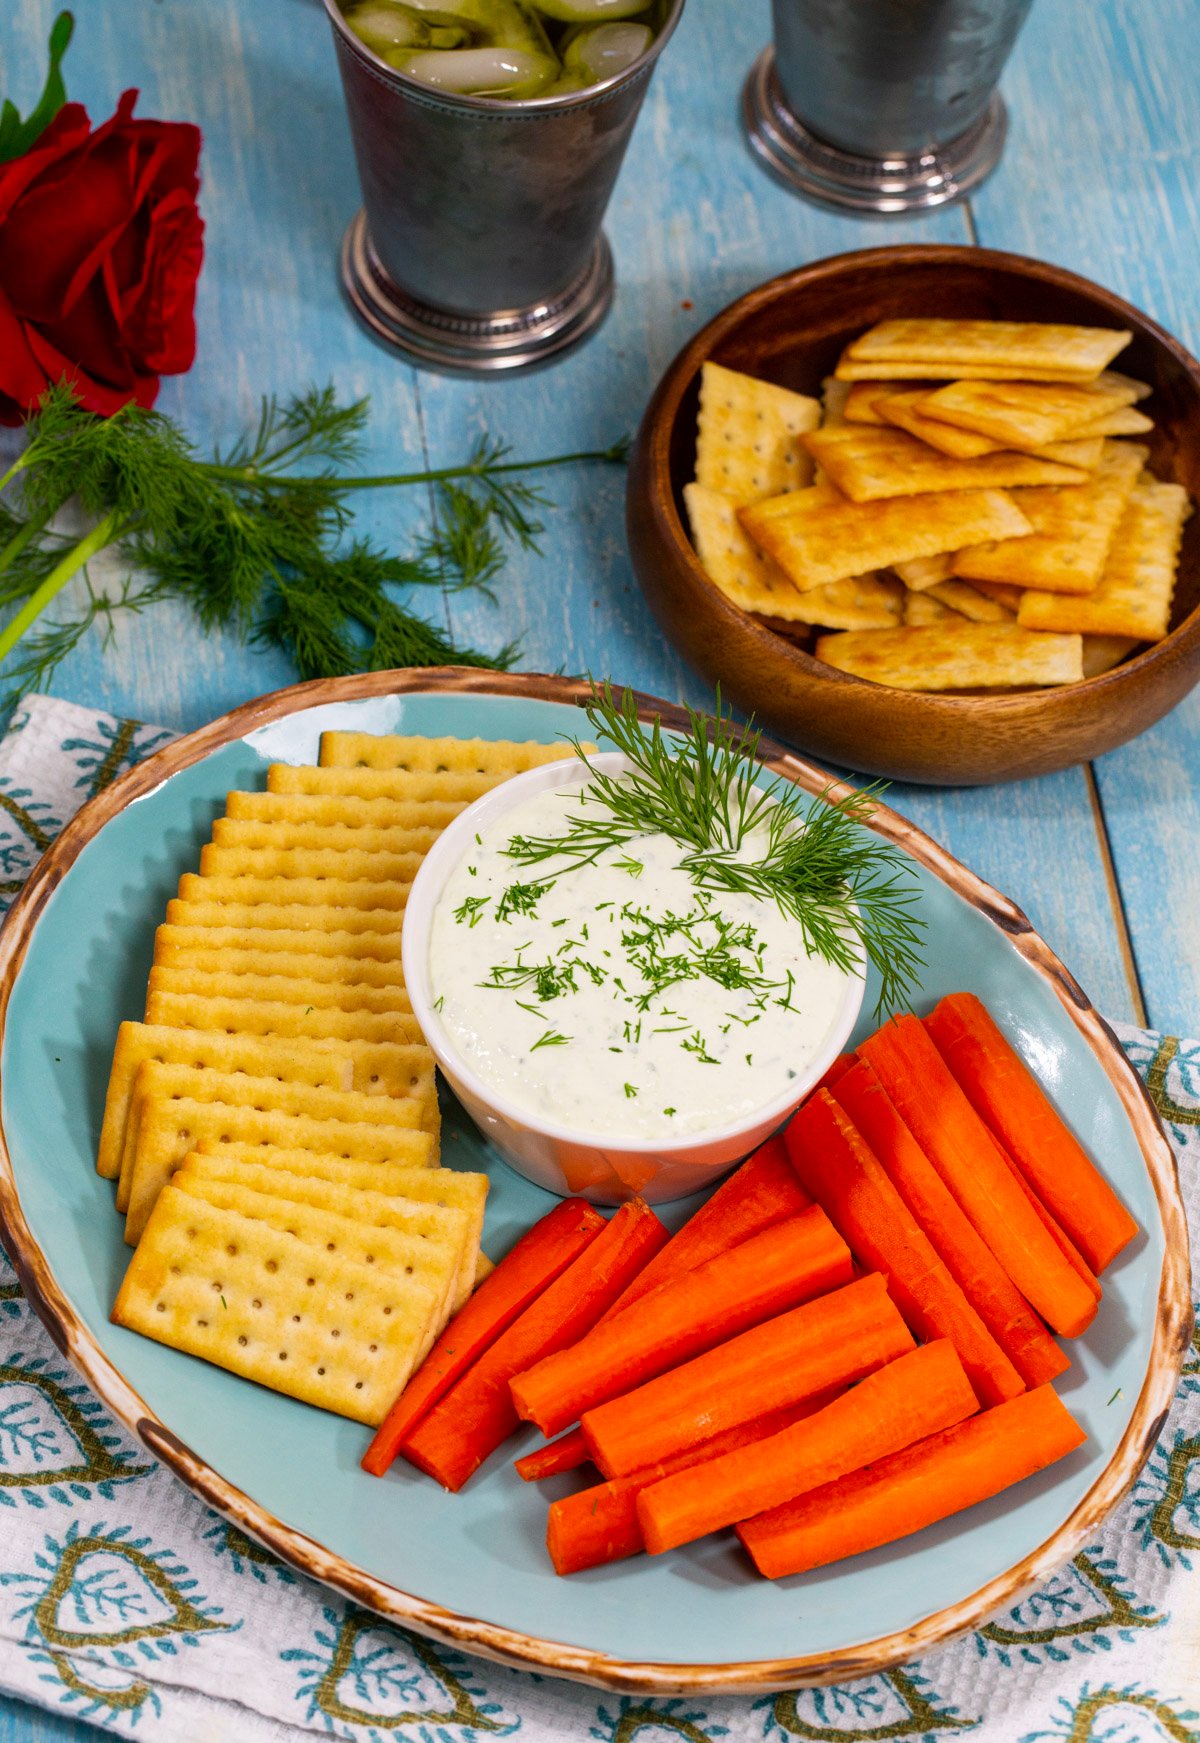 Benedictine dip in a bowl with crackers and carrot sticks.